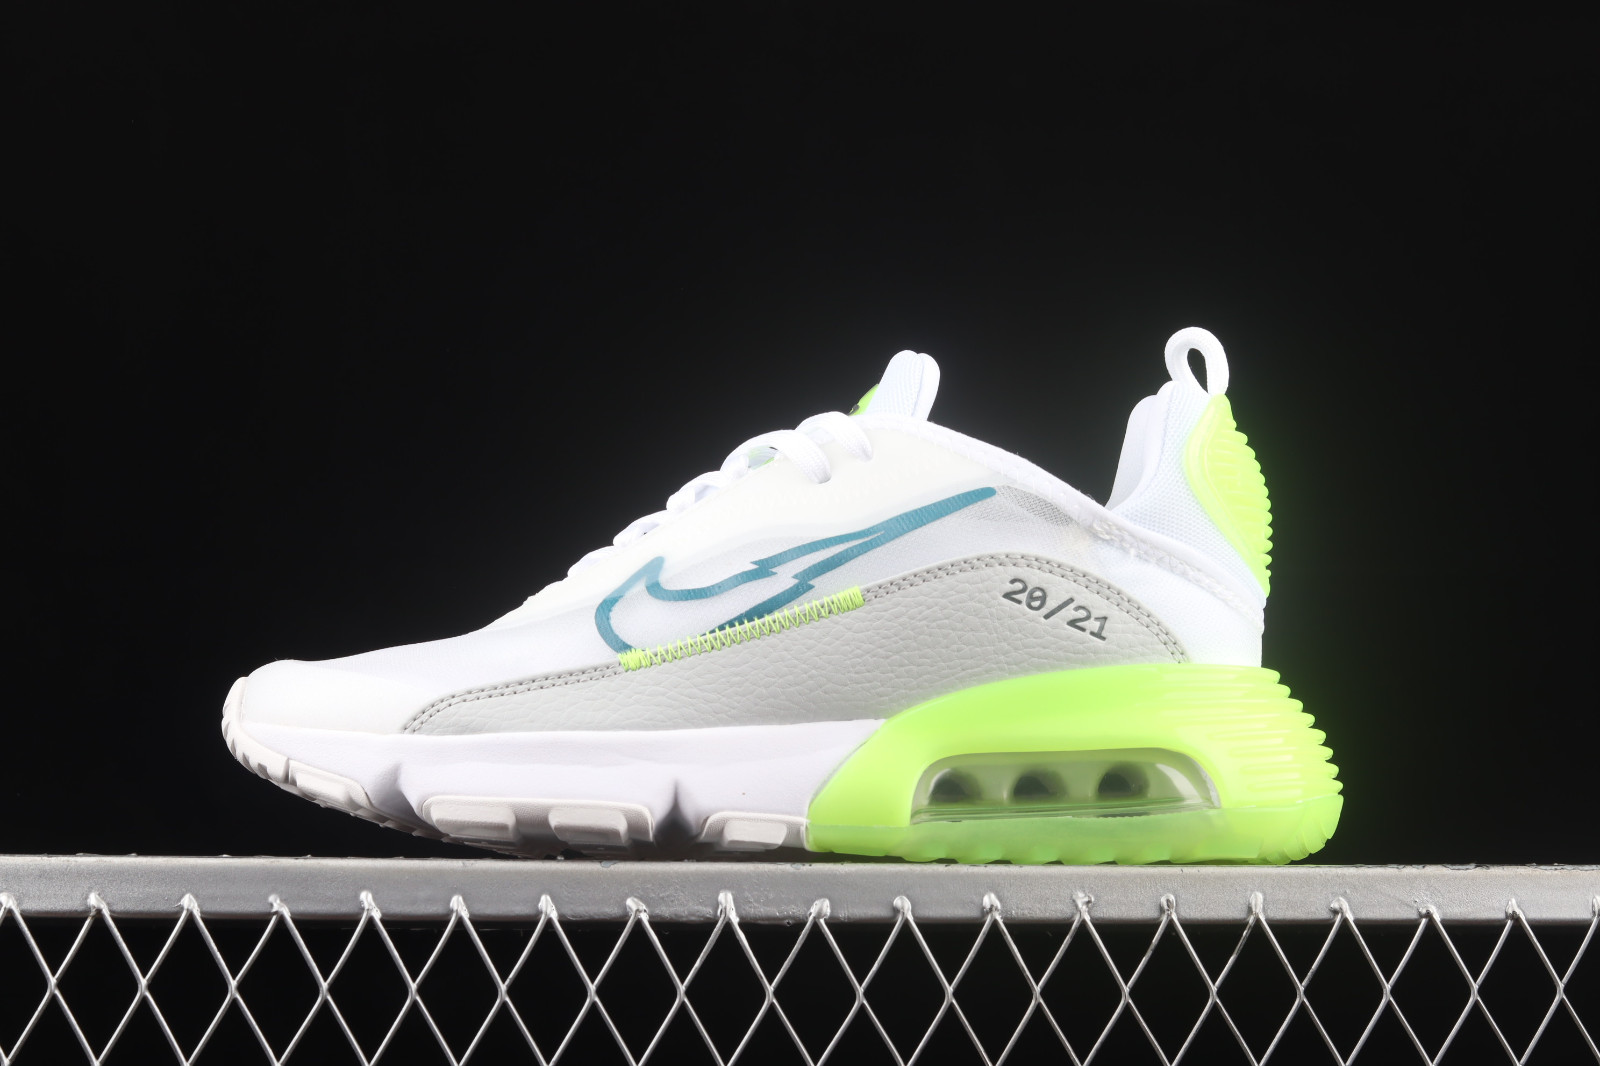 Nike Air Max 2090 White Lime Glow Shoes DJ6898 - 100 - nike air max thea flyknit melon black friday deals - GmarShops